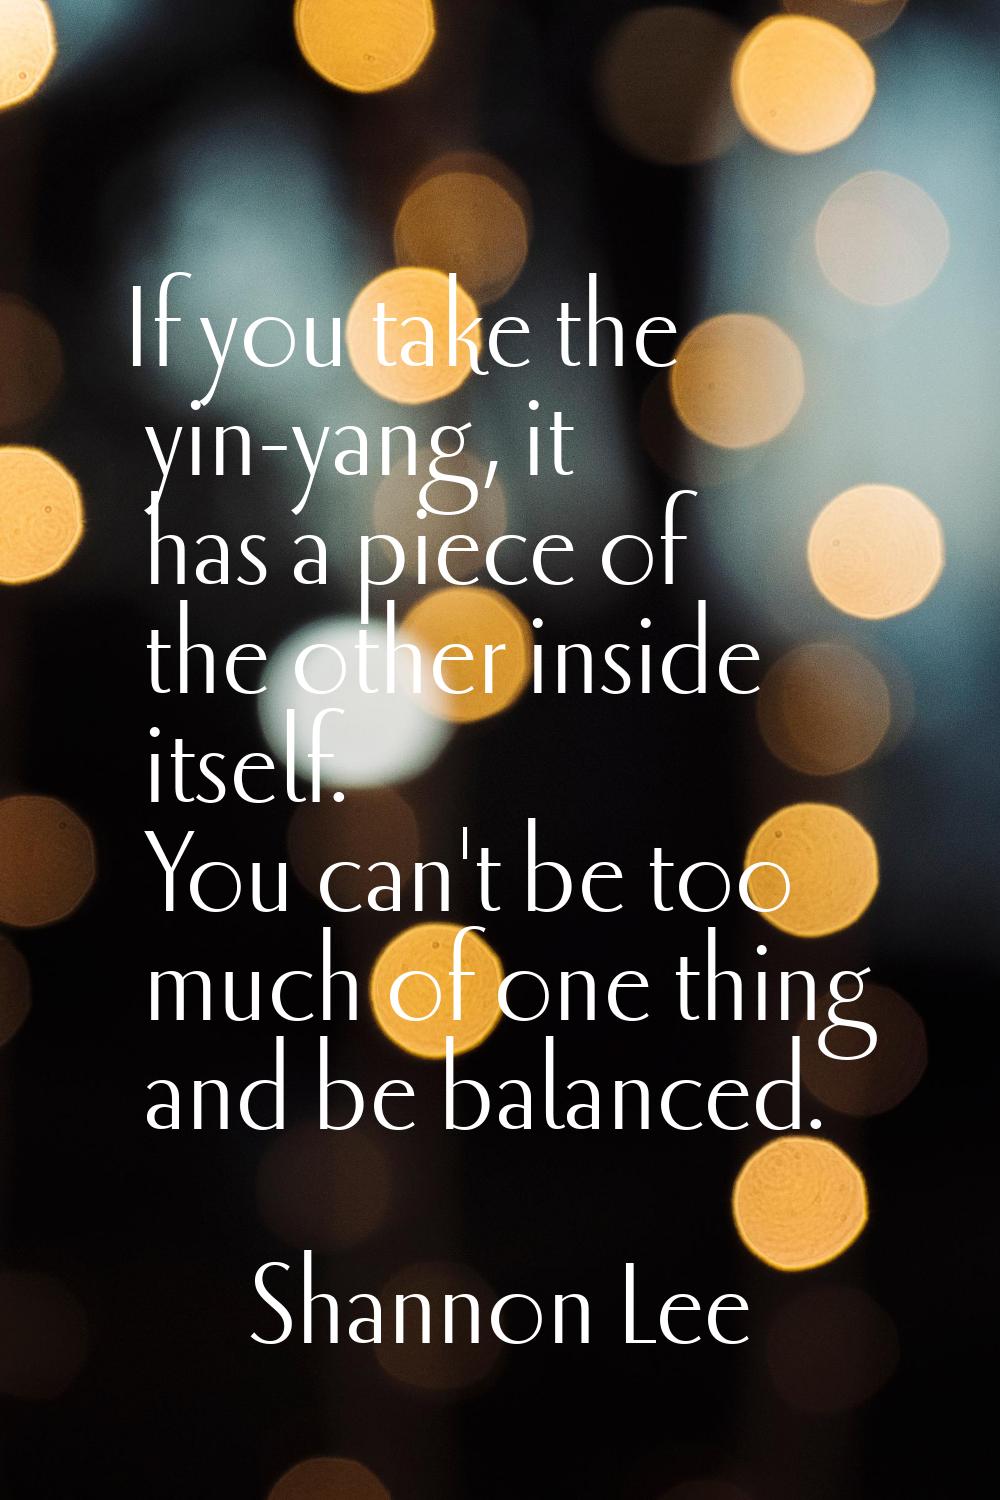 If you take the yin-yang, it has a piece of the other inside itself. You can't be too much of one t